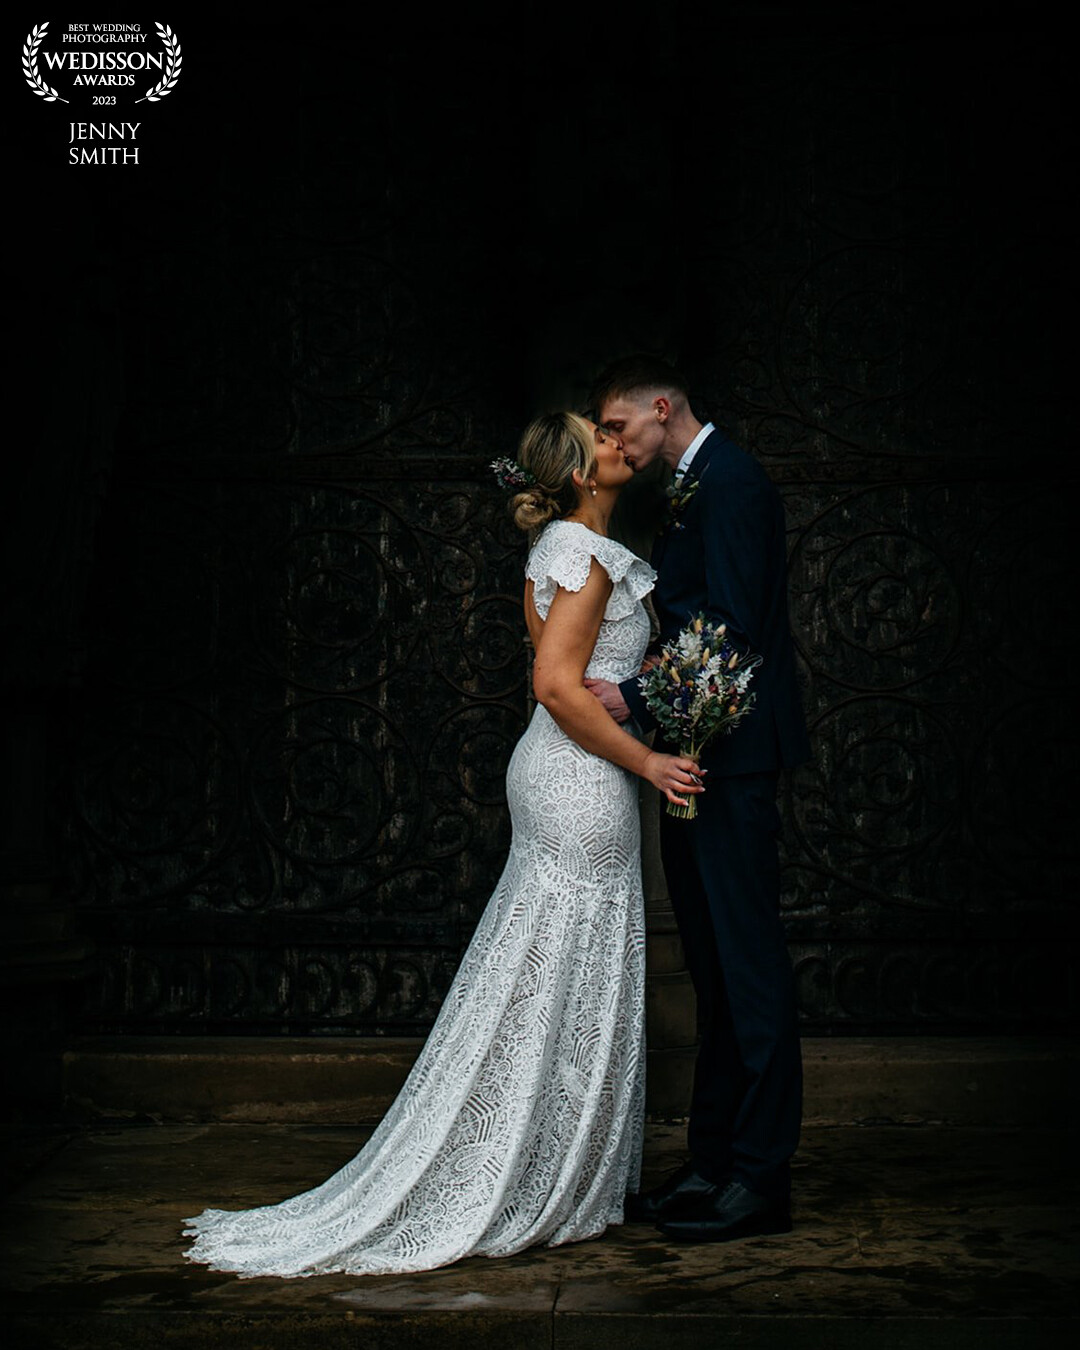 There were a few April showers on Keeley and Corys day so we took shelter in the decorative doorways of Lichfield Cathedral. A passer by held a brolly over me and my cameras whilst I shot this portrait of the couple.